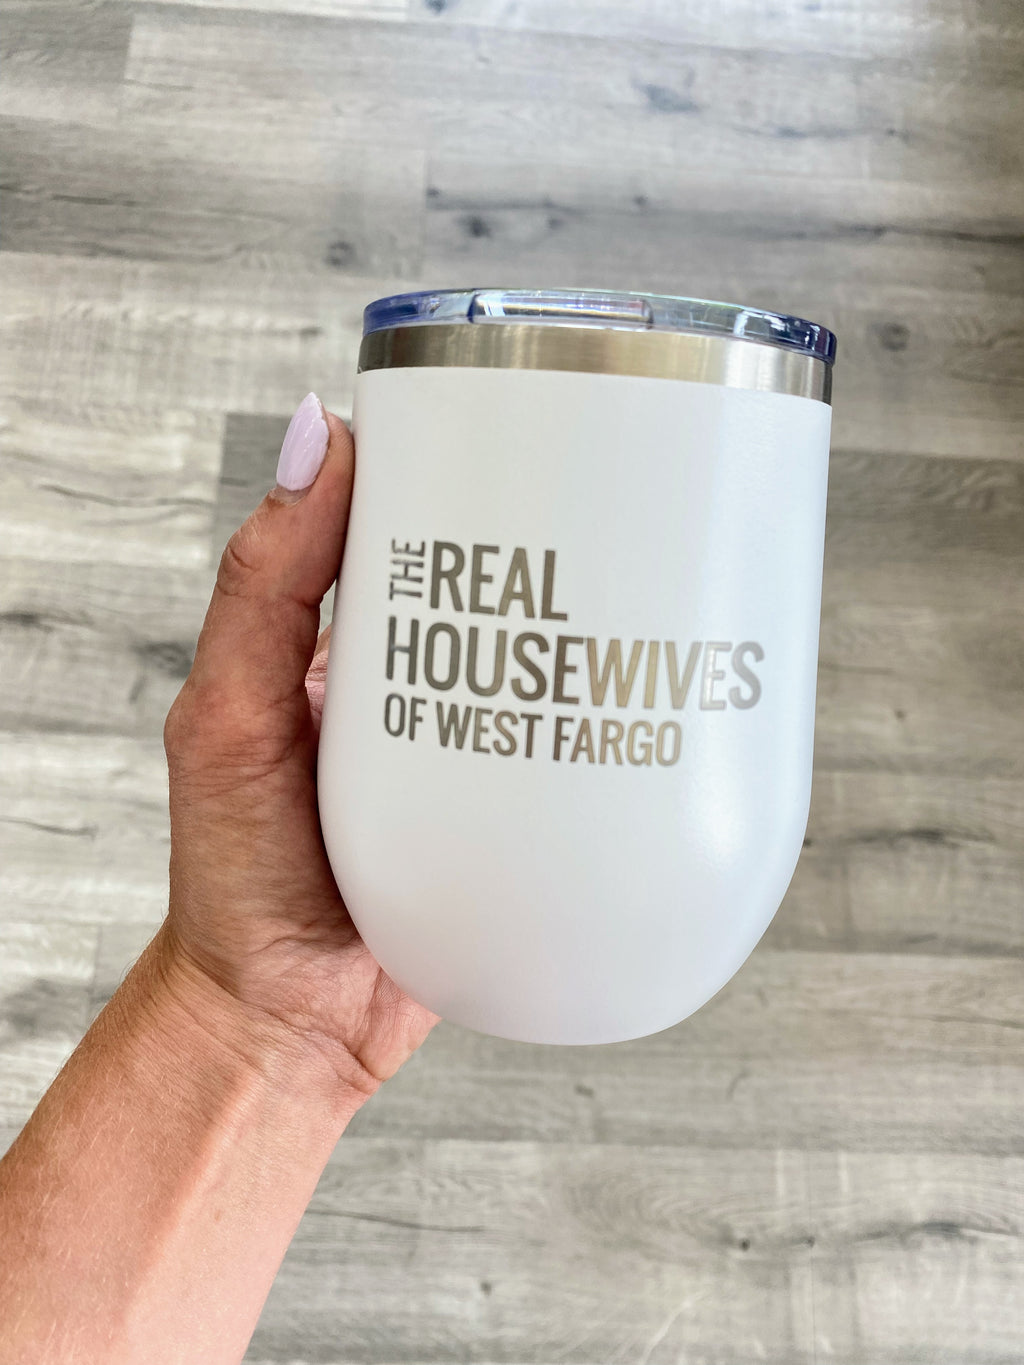 Real Housewives of West Fargo Wine Tumbler